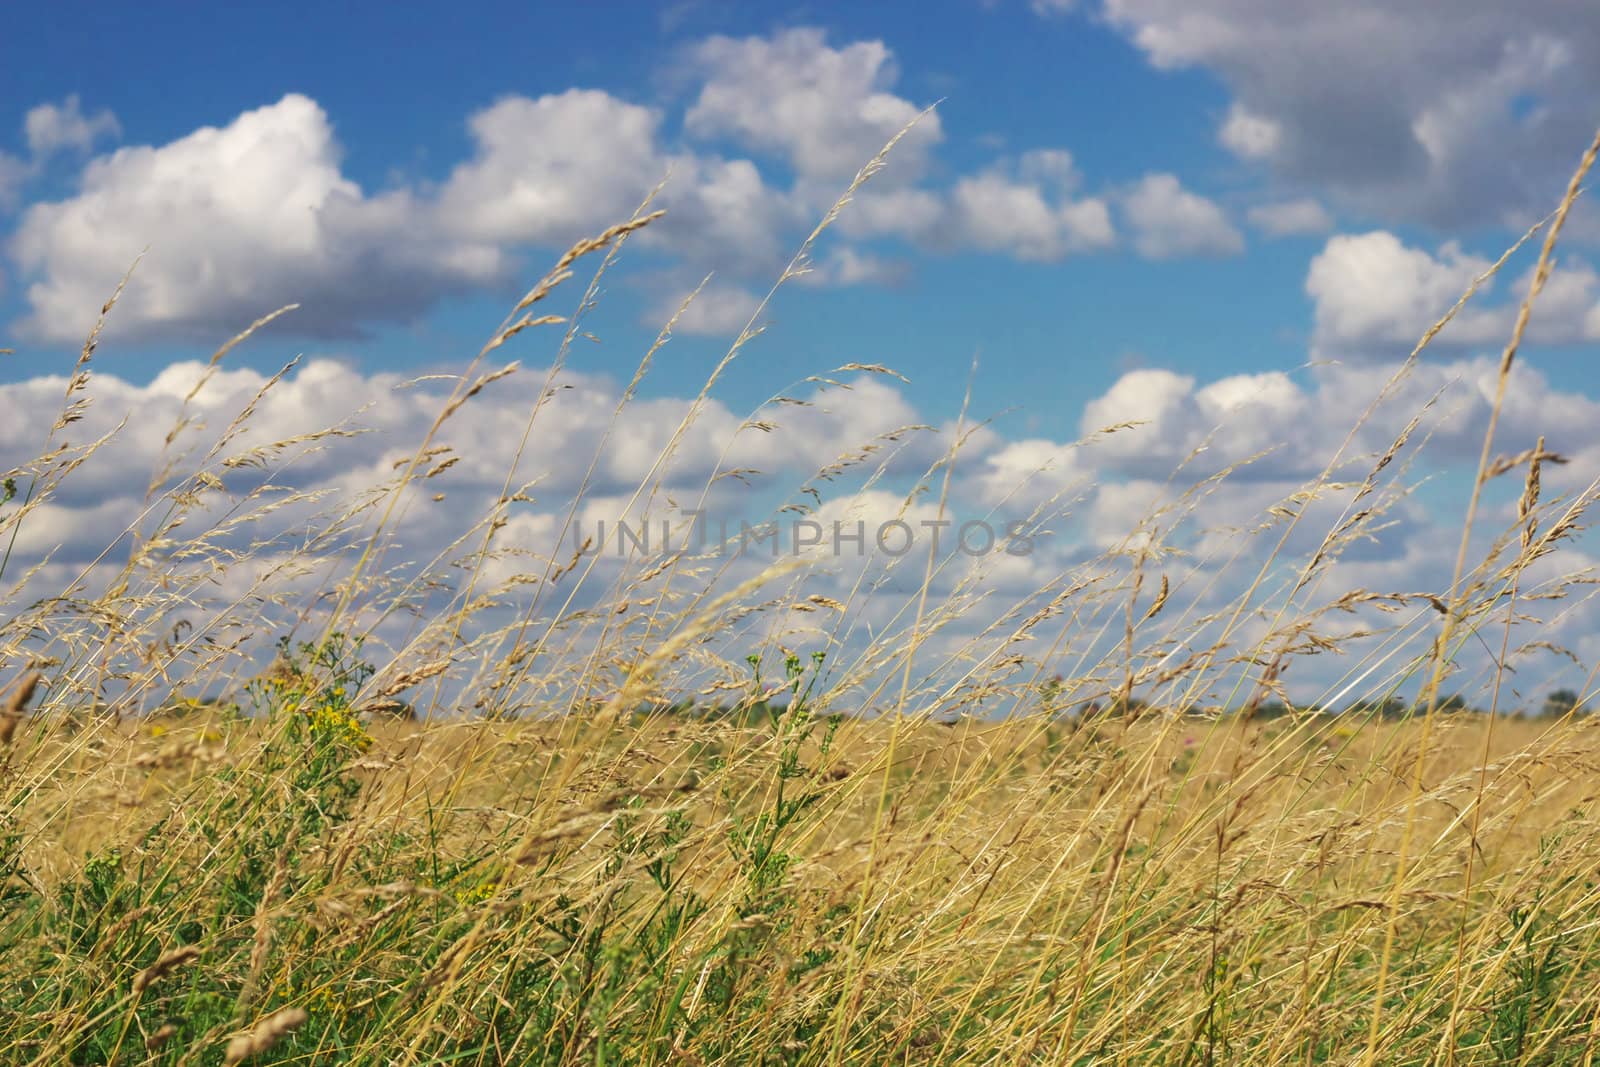 Wheat Field and blue sky